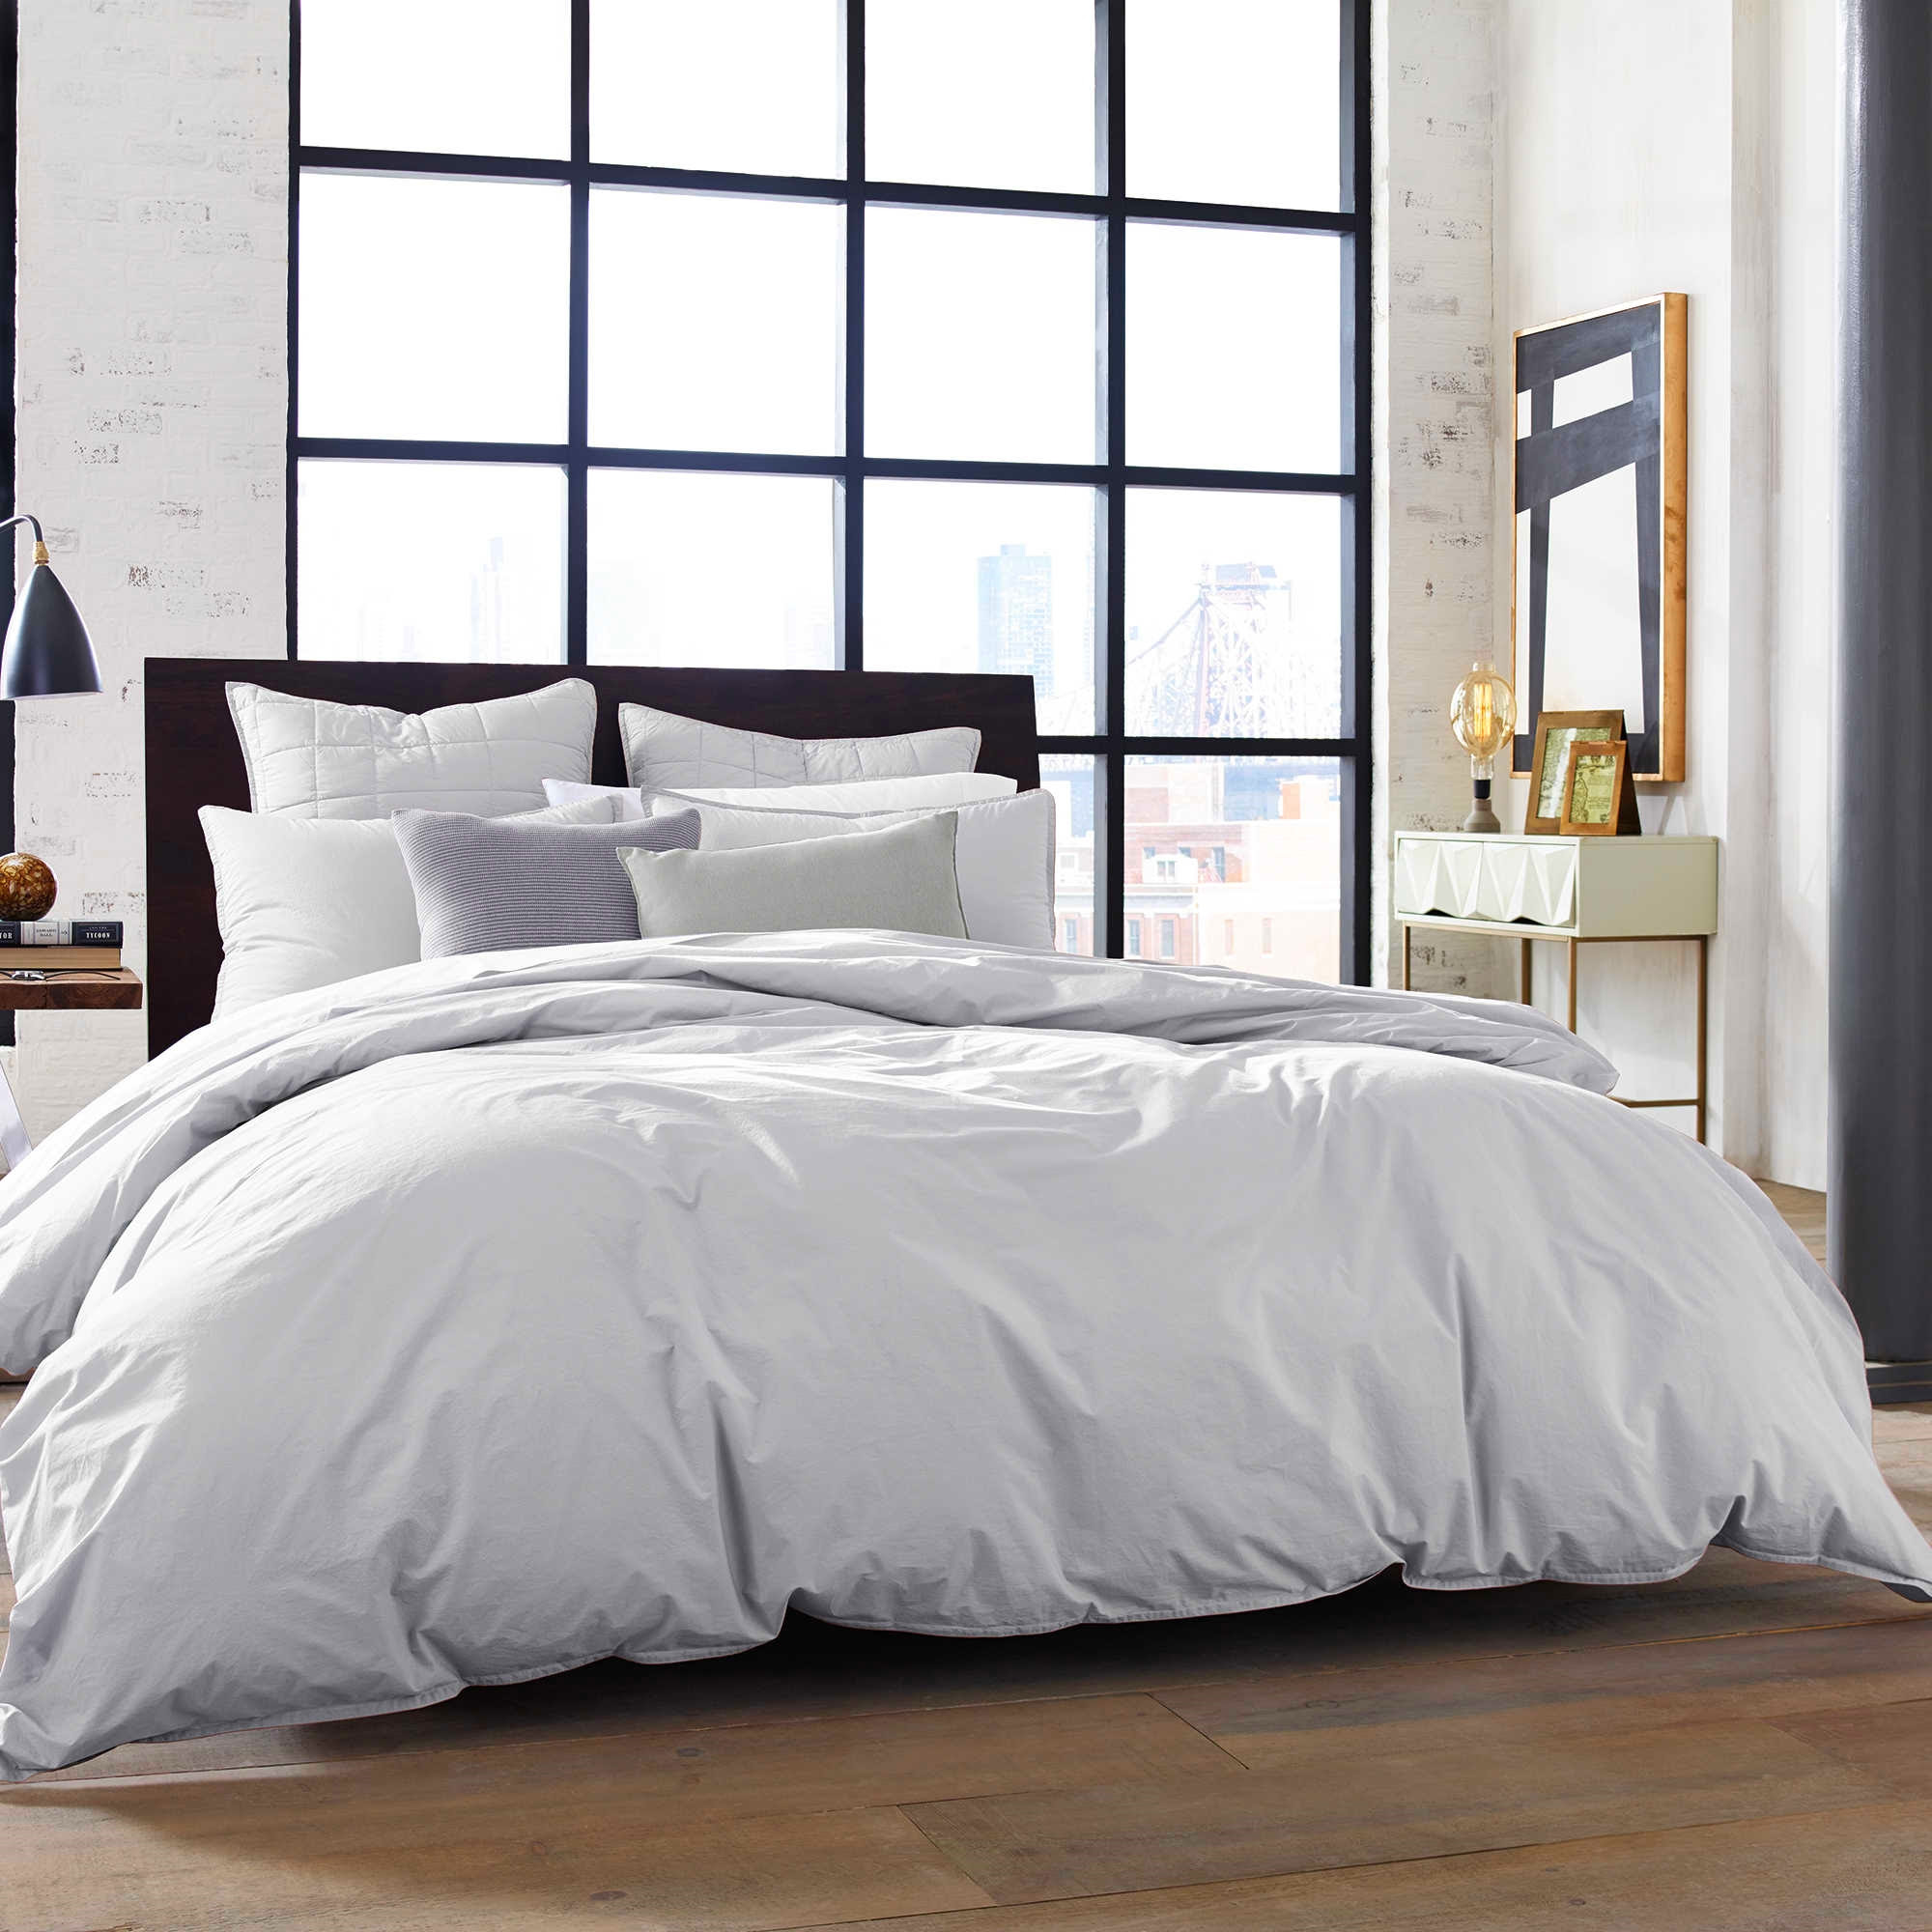 Kenneth Cole Bedding, Kenneth Cole Reaction Home Mineral Duvet Cover In Stoney Blue